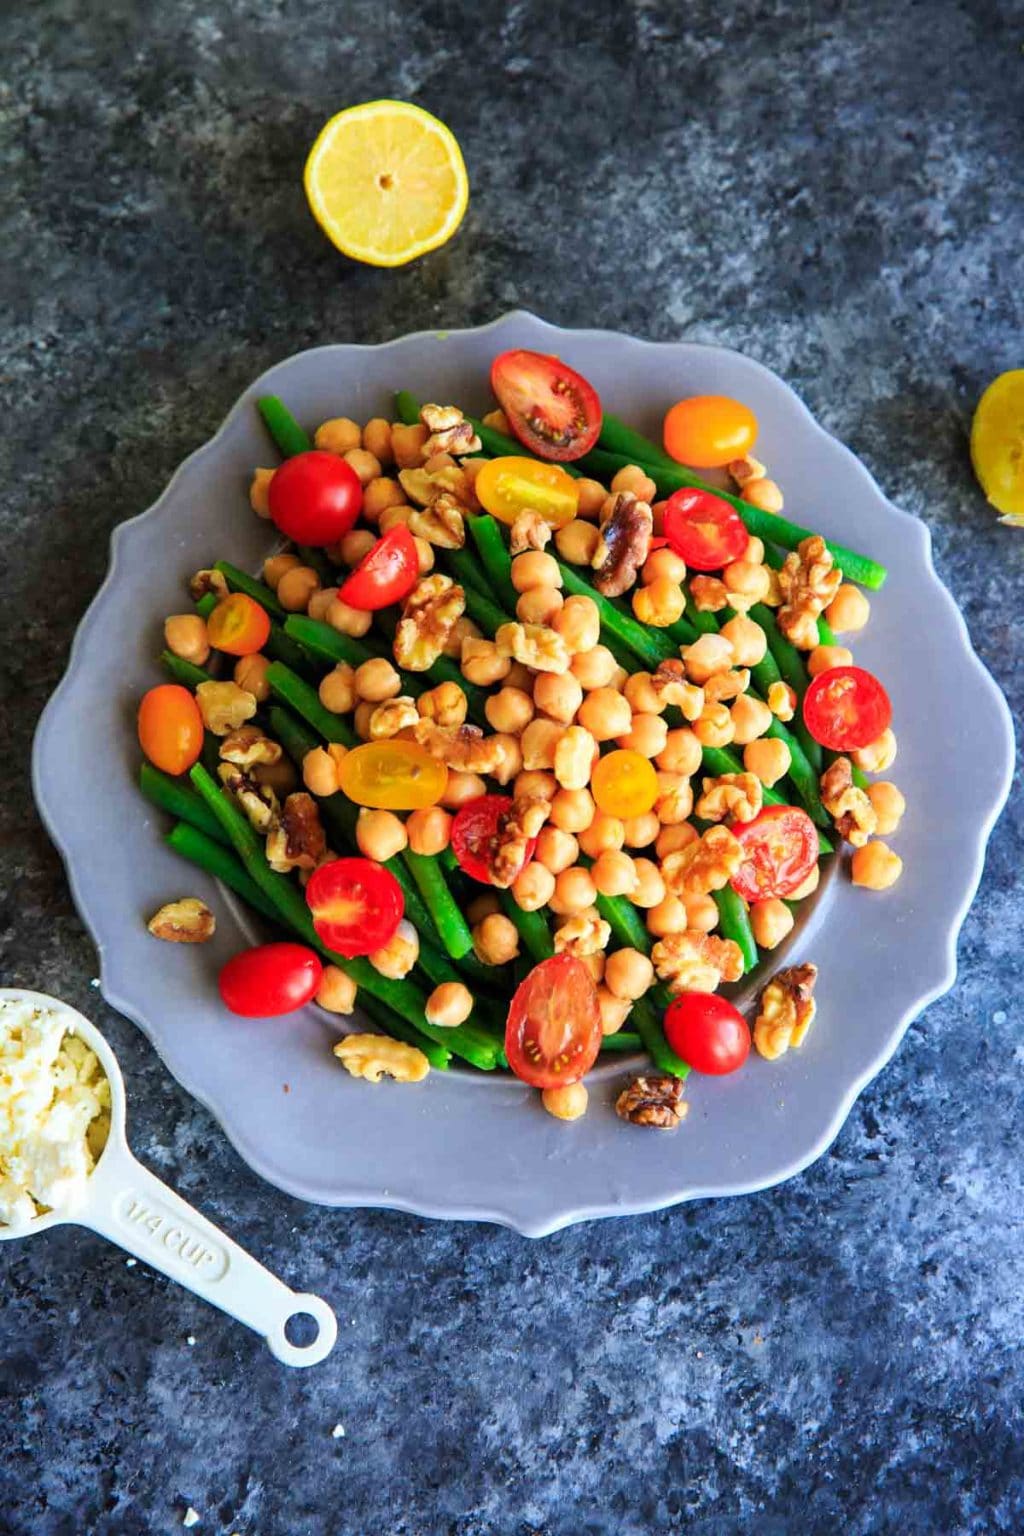 Green Bean Chickpea Salad with tomato, walnuts and feta. A great appetizer or side dish for dinners or holiday gatherings!